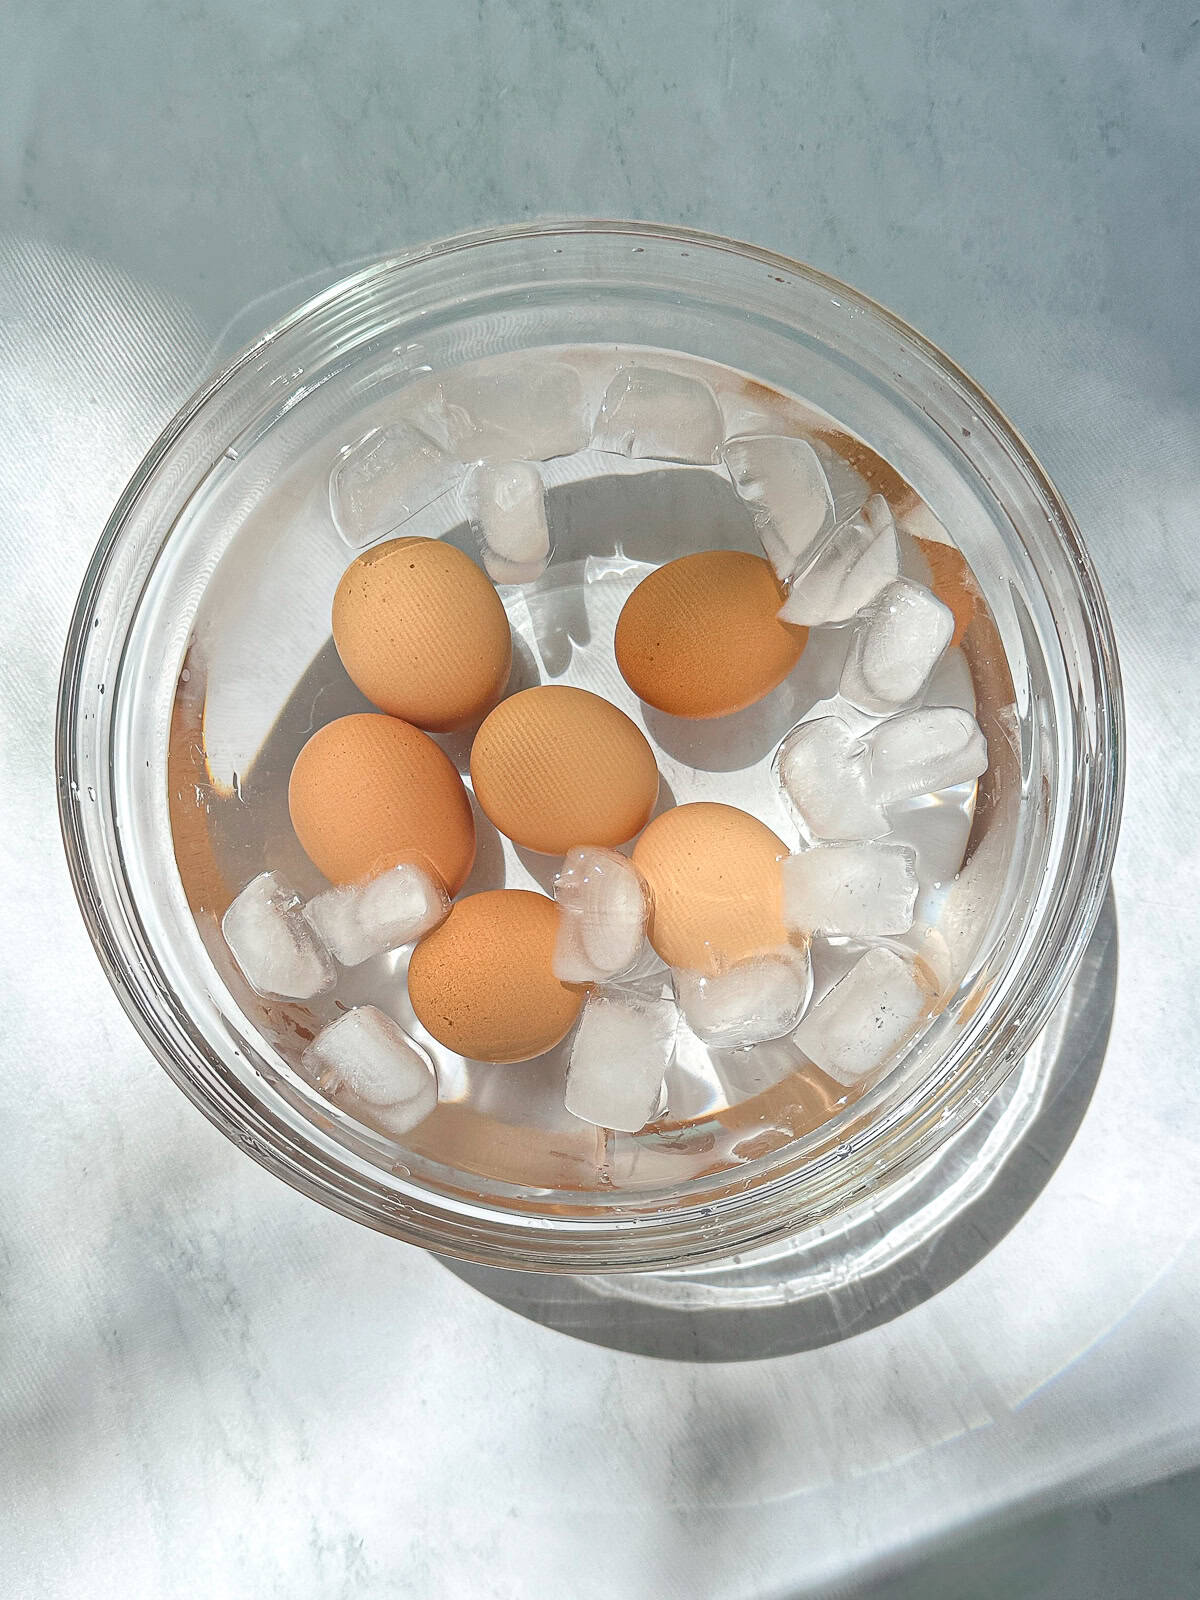 Boiled eggs in a bowl of ice water.